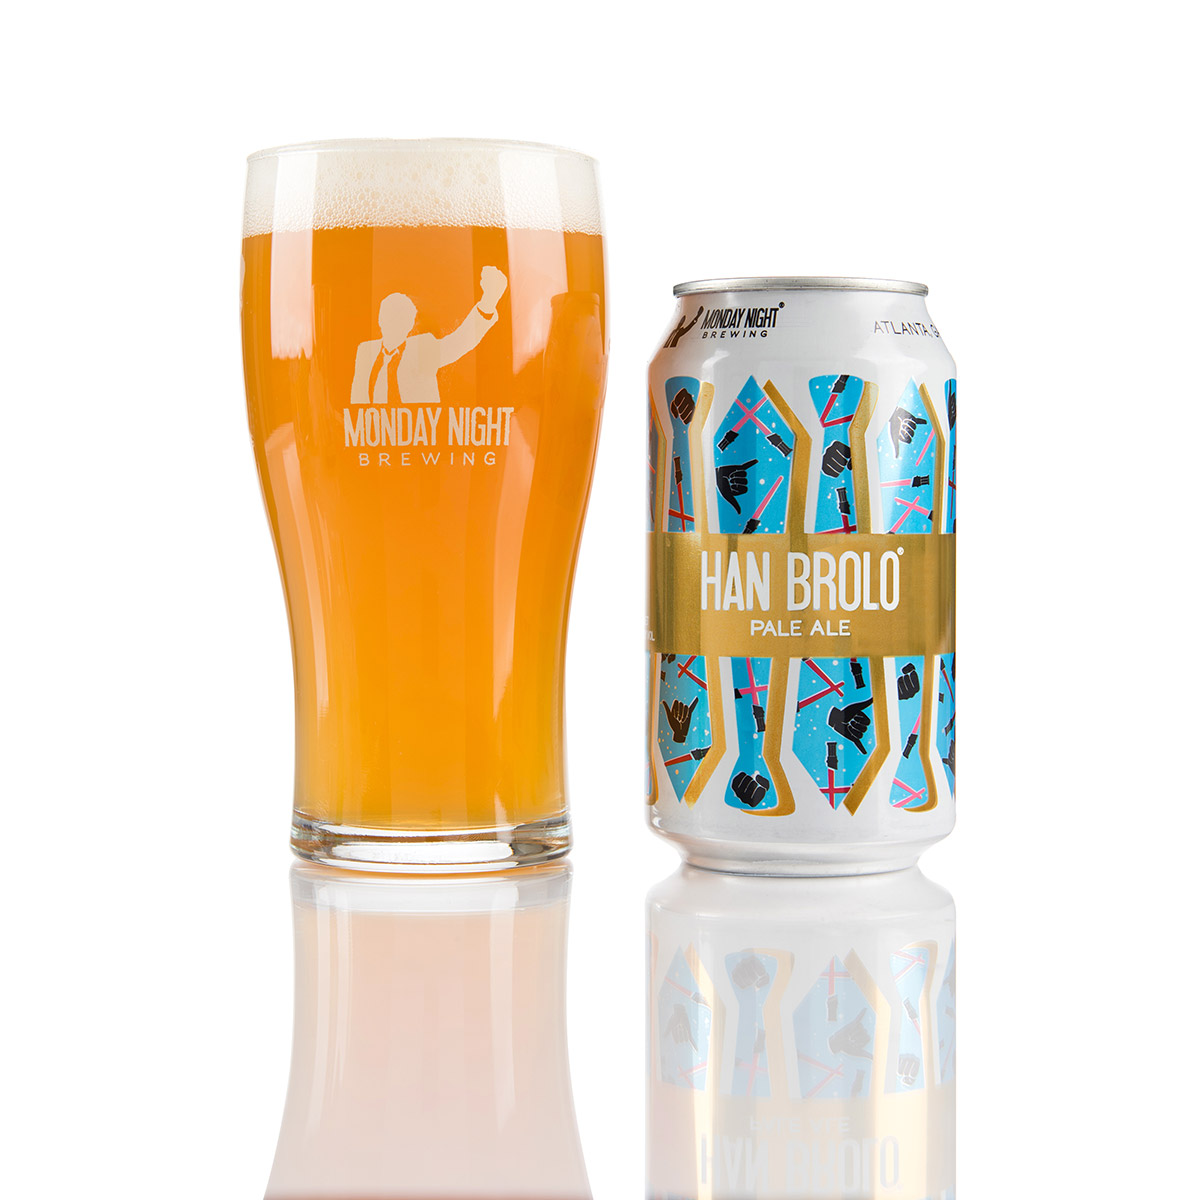 Han Brolo – Rated 92 Monday Night Brewing